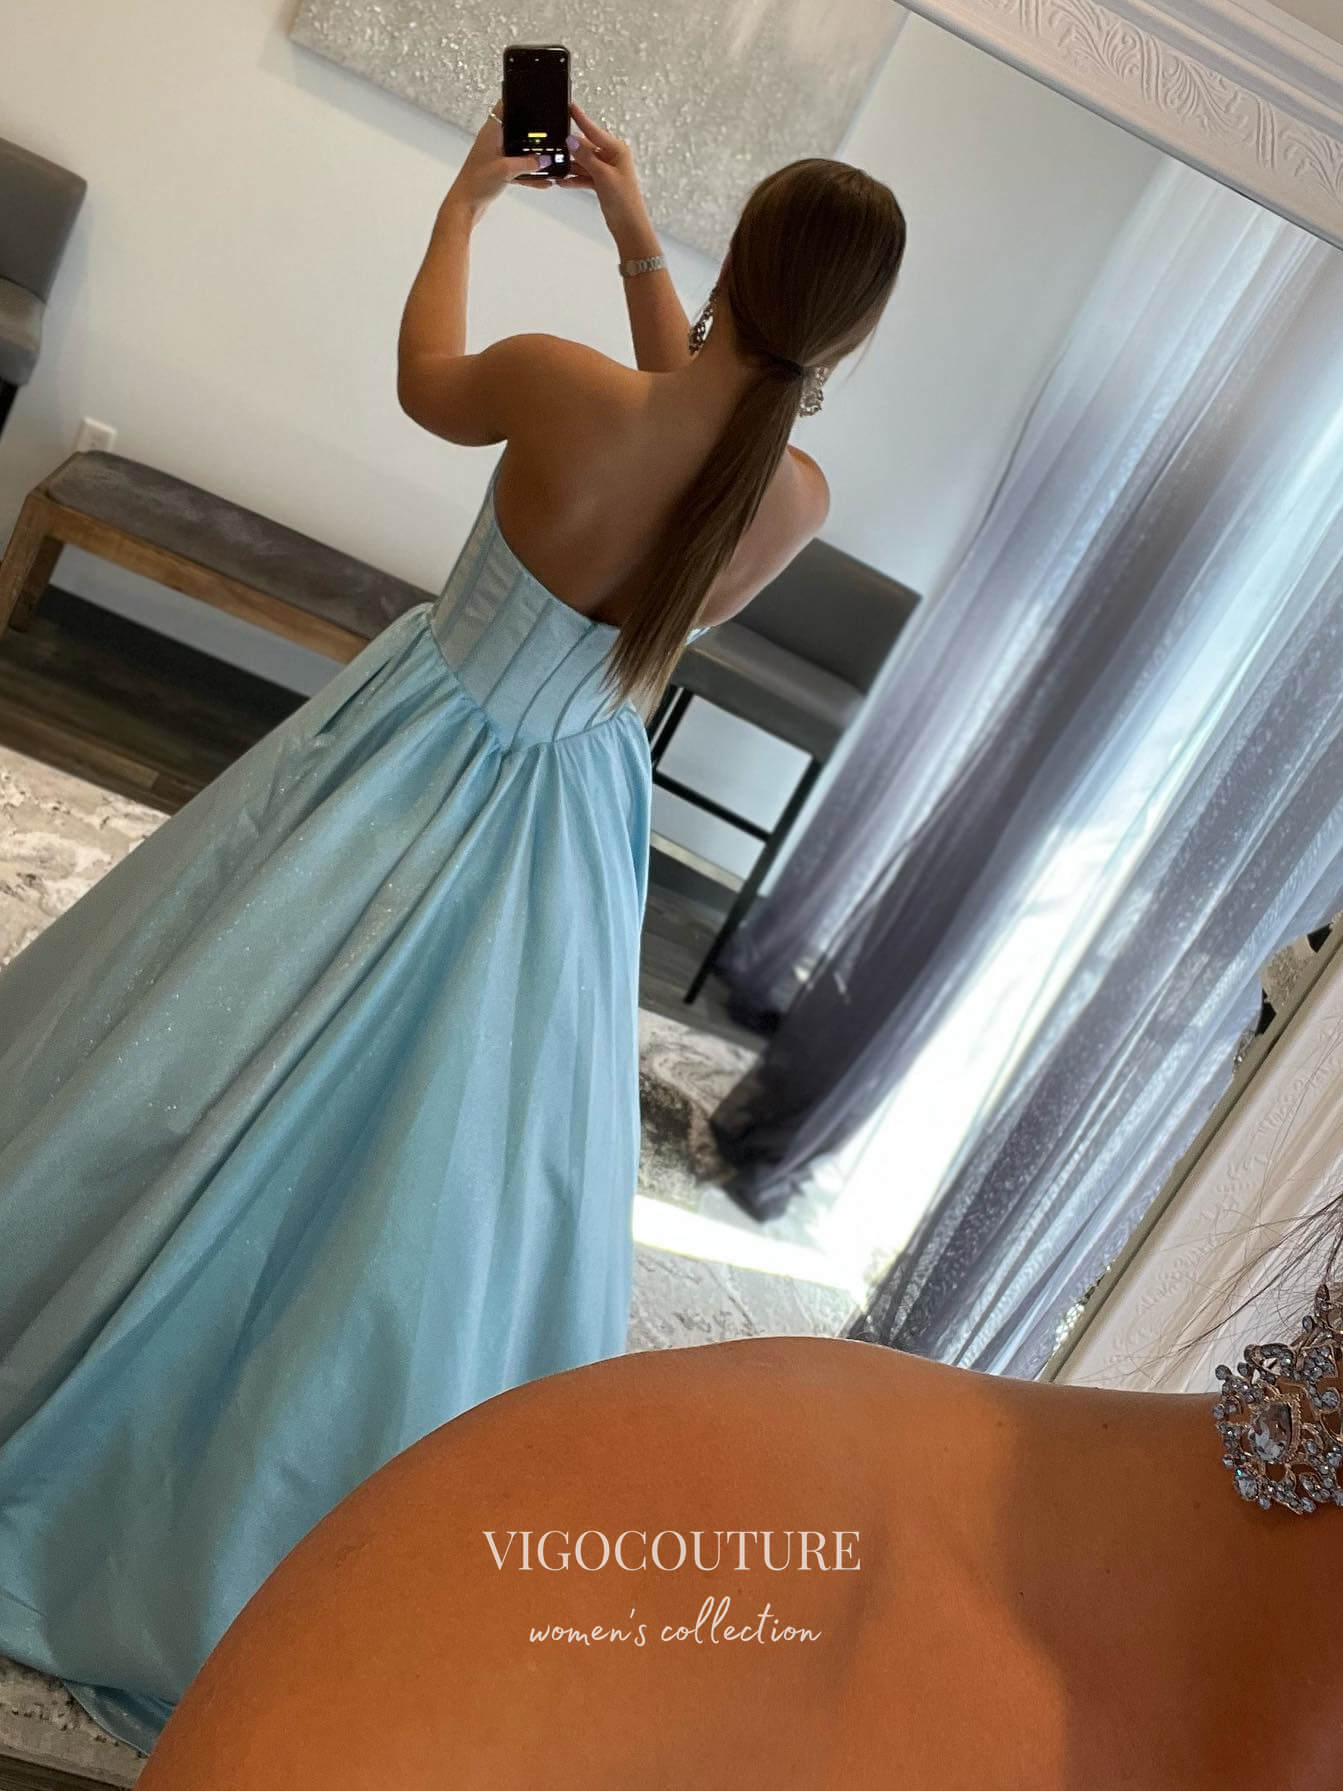 vigocouture-Light Blue Sweetheart Neck Prom Dresses With Pockets Sparkly Satin Evening Dresses 21567-Prom Dresses-vigocouture-